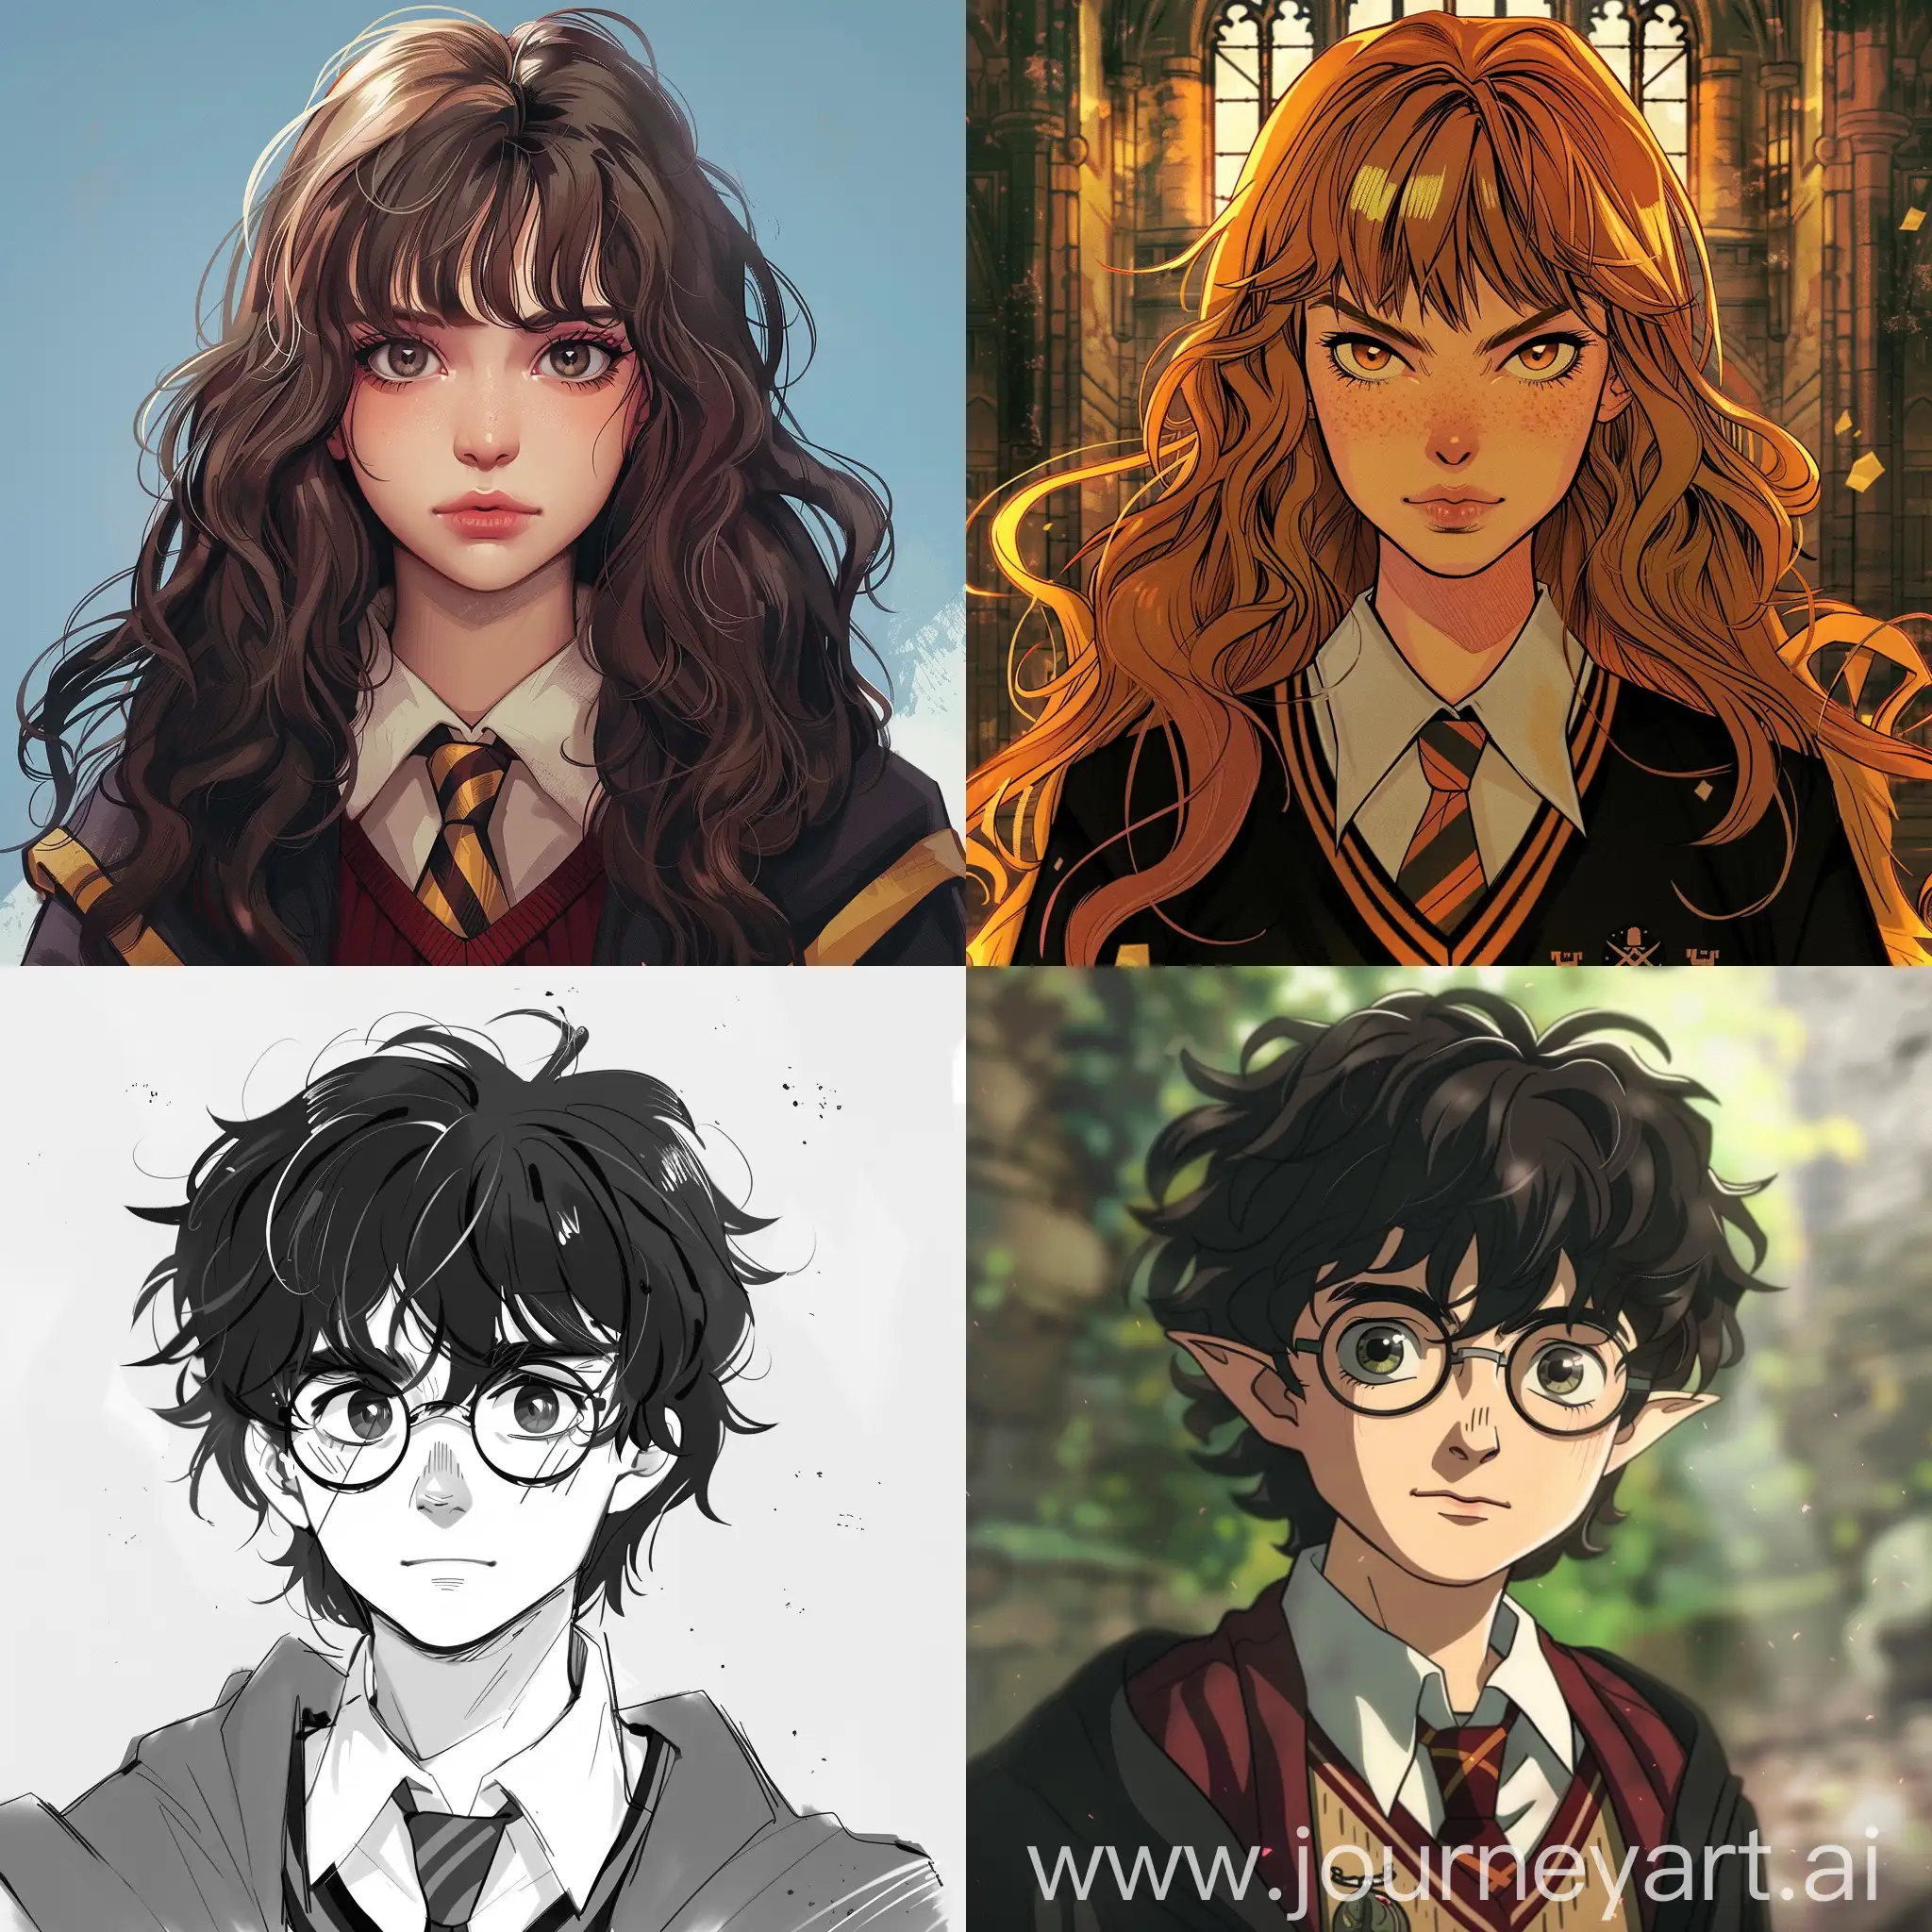 Gryffindor-Manga-Style-Portrait-Young-Wizard-in-Iconic-Red-and-Gold